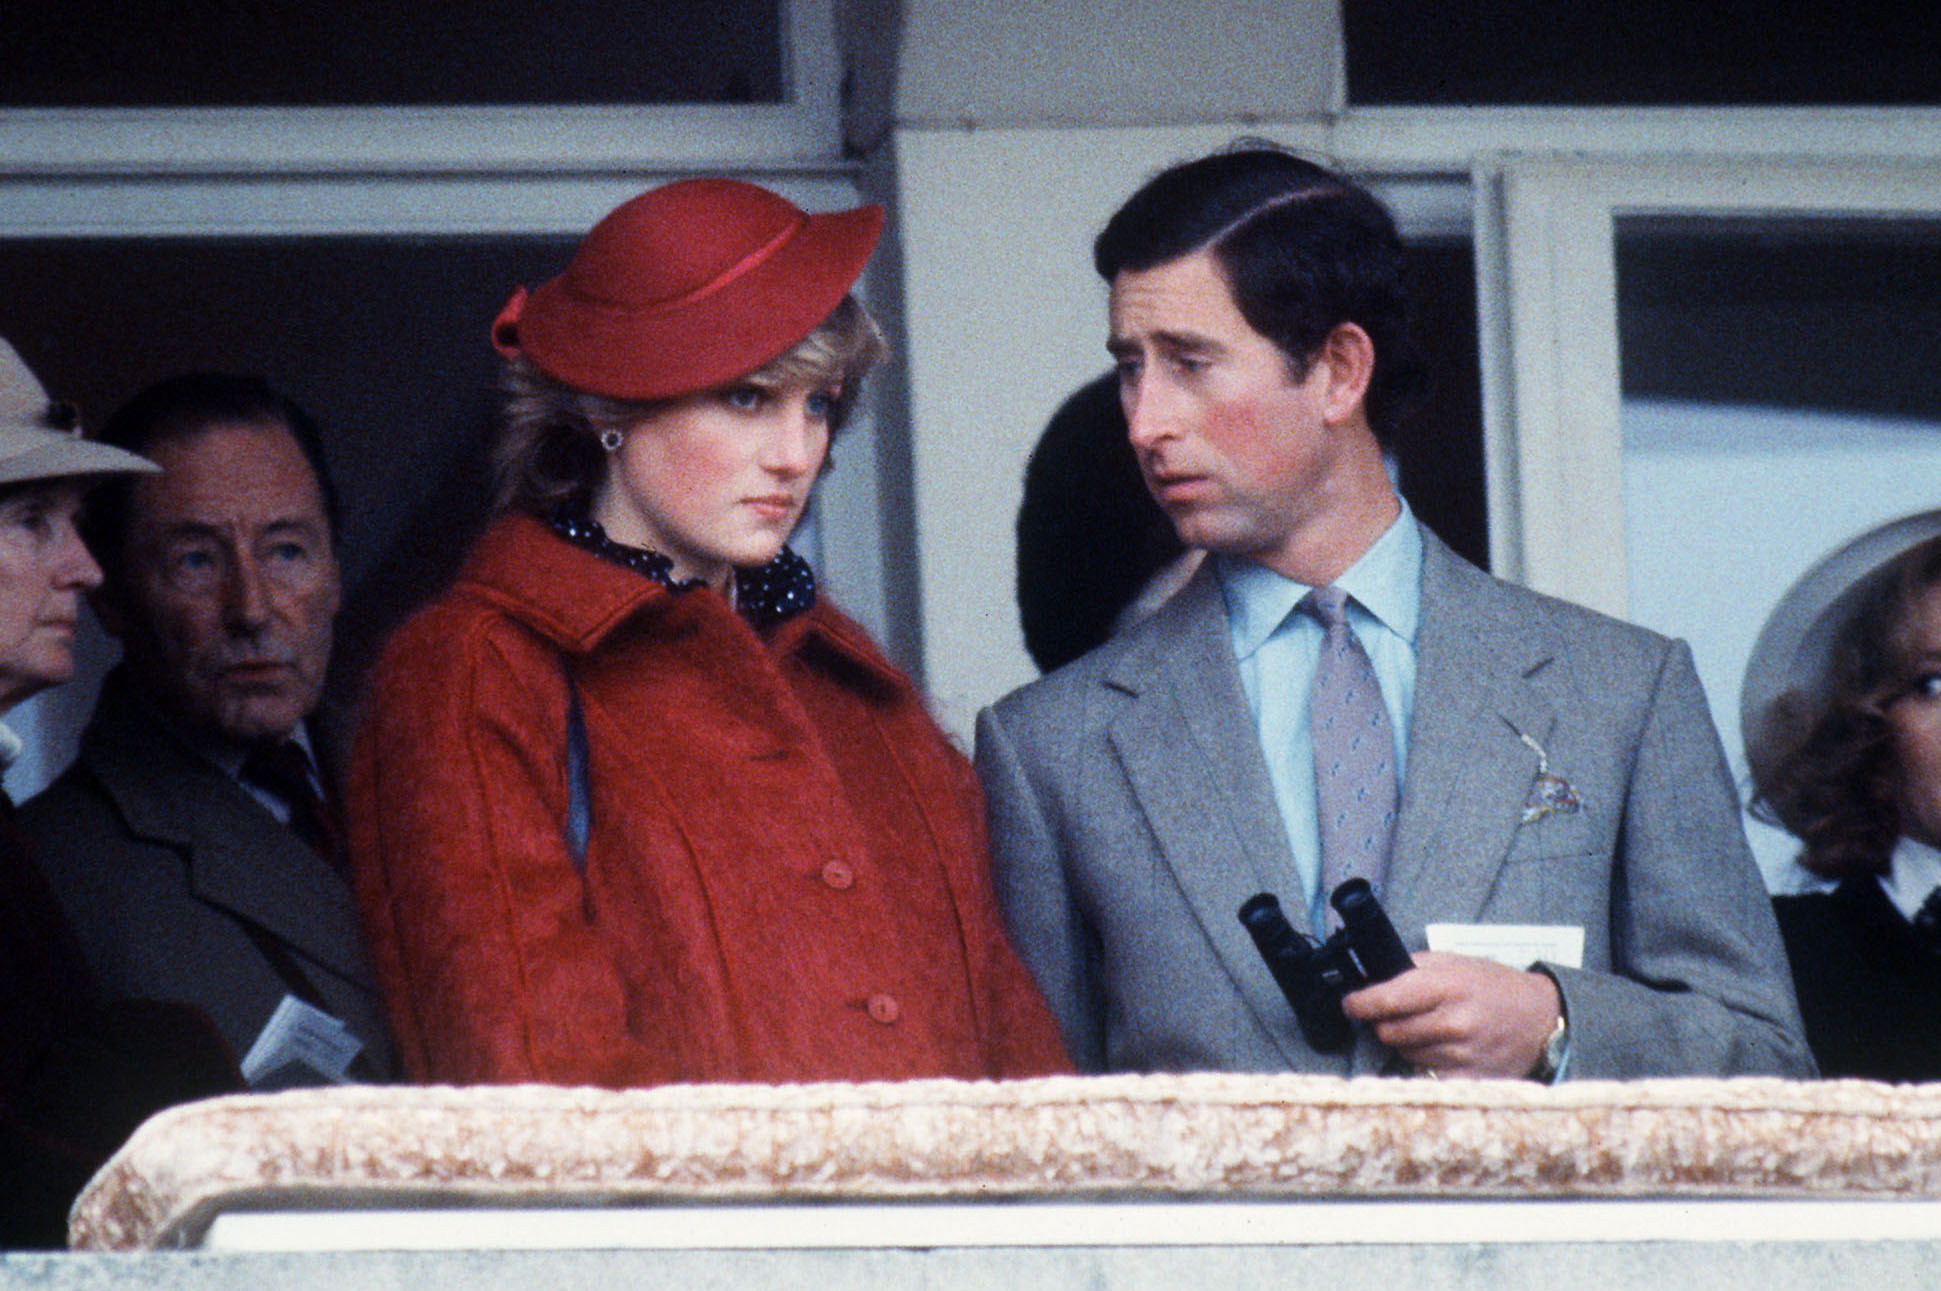 Princess Diana and Prince Charles at Cheltenham Races on March 17, 1982 | Source: Getty Images